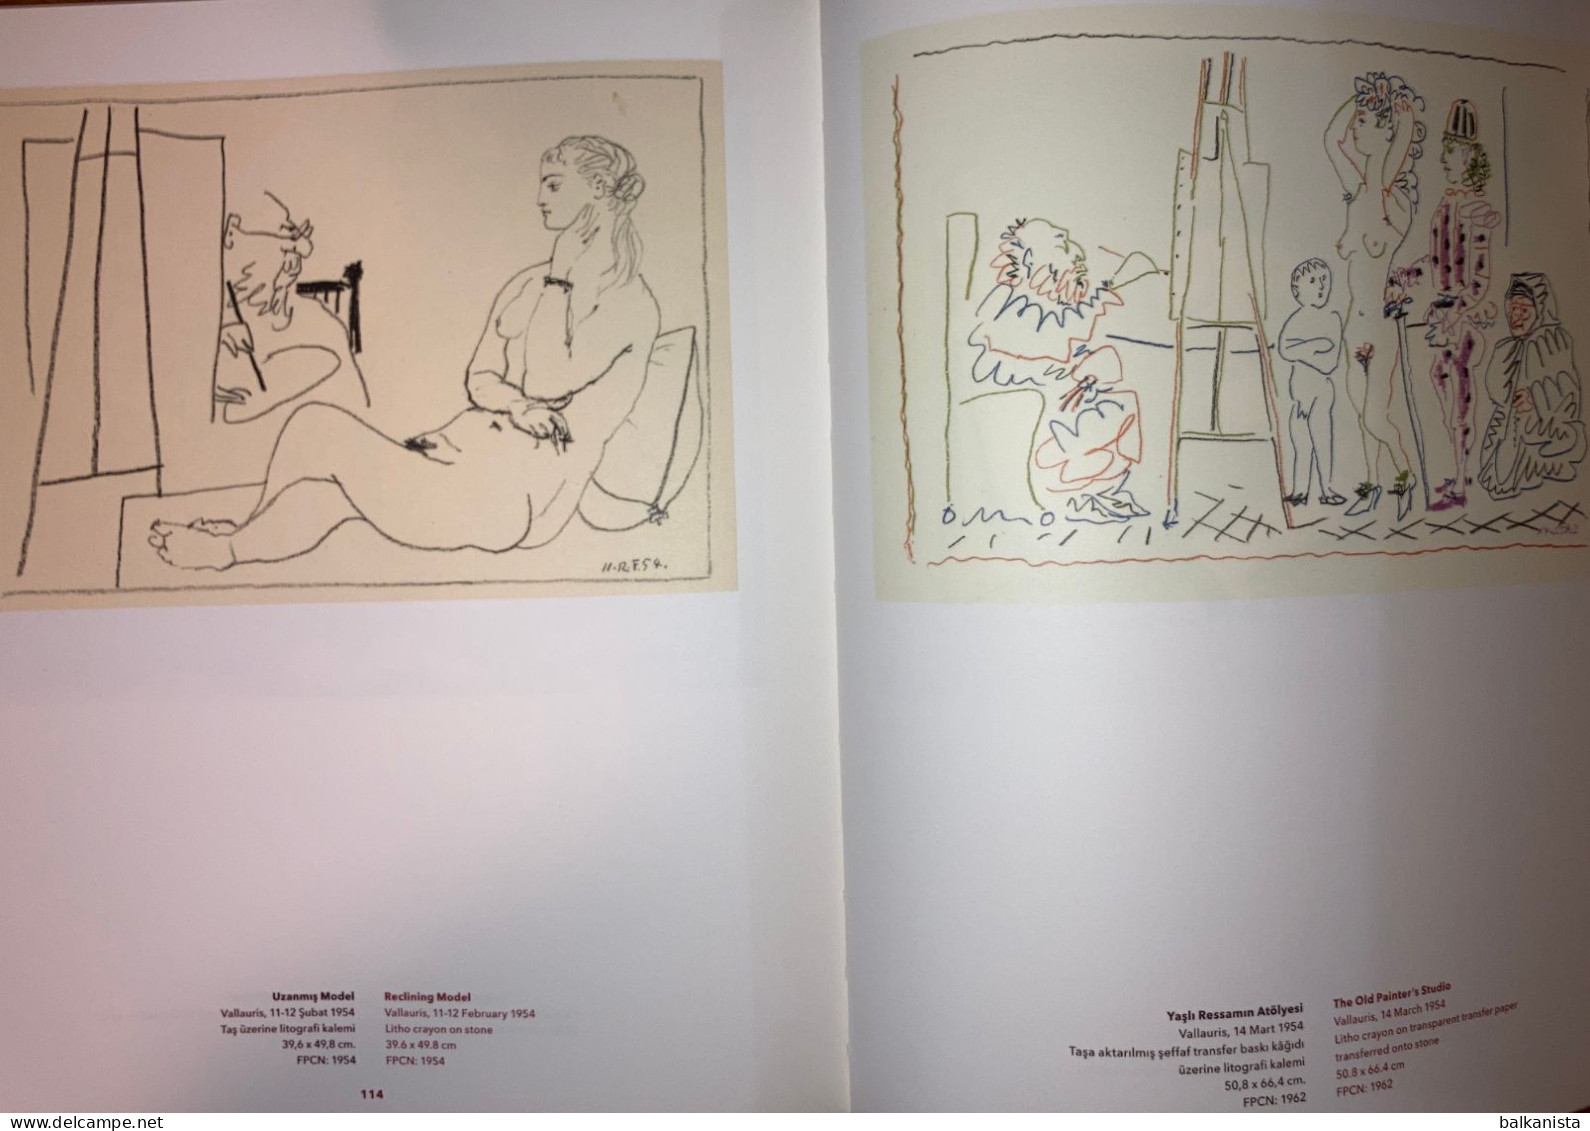 Picasso Engravings and Ceramics from the House of His Birth Painting Exhibition